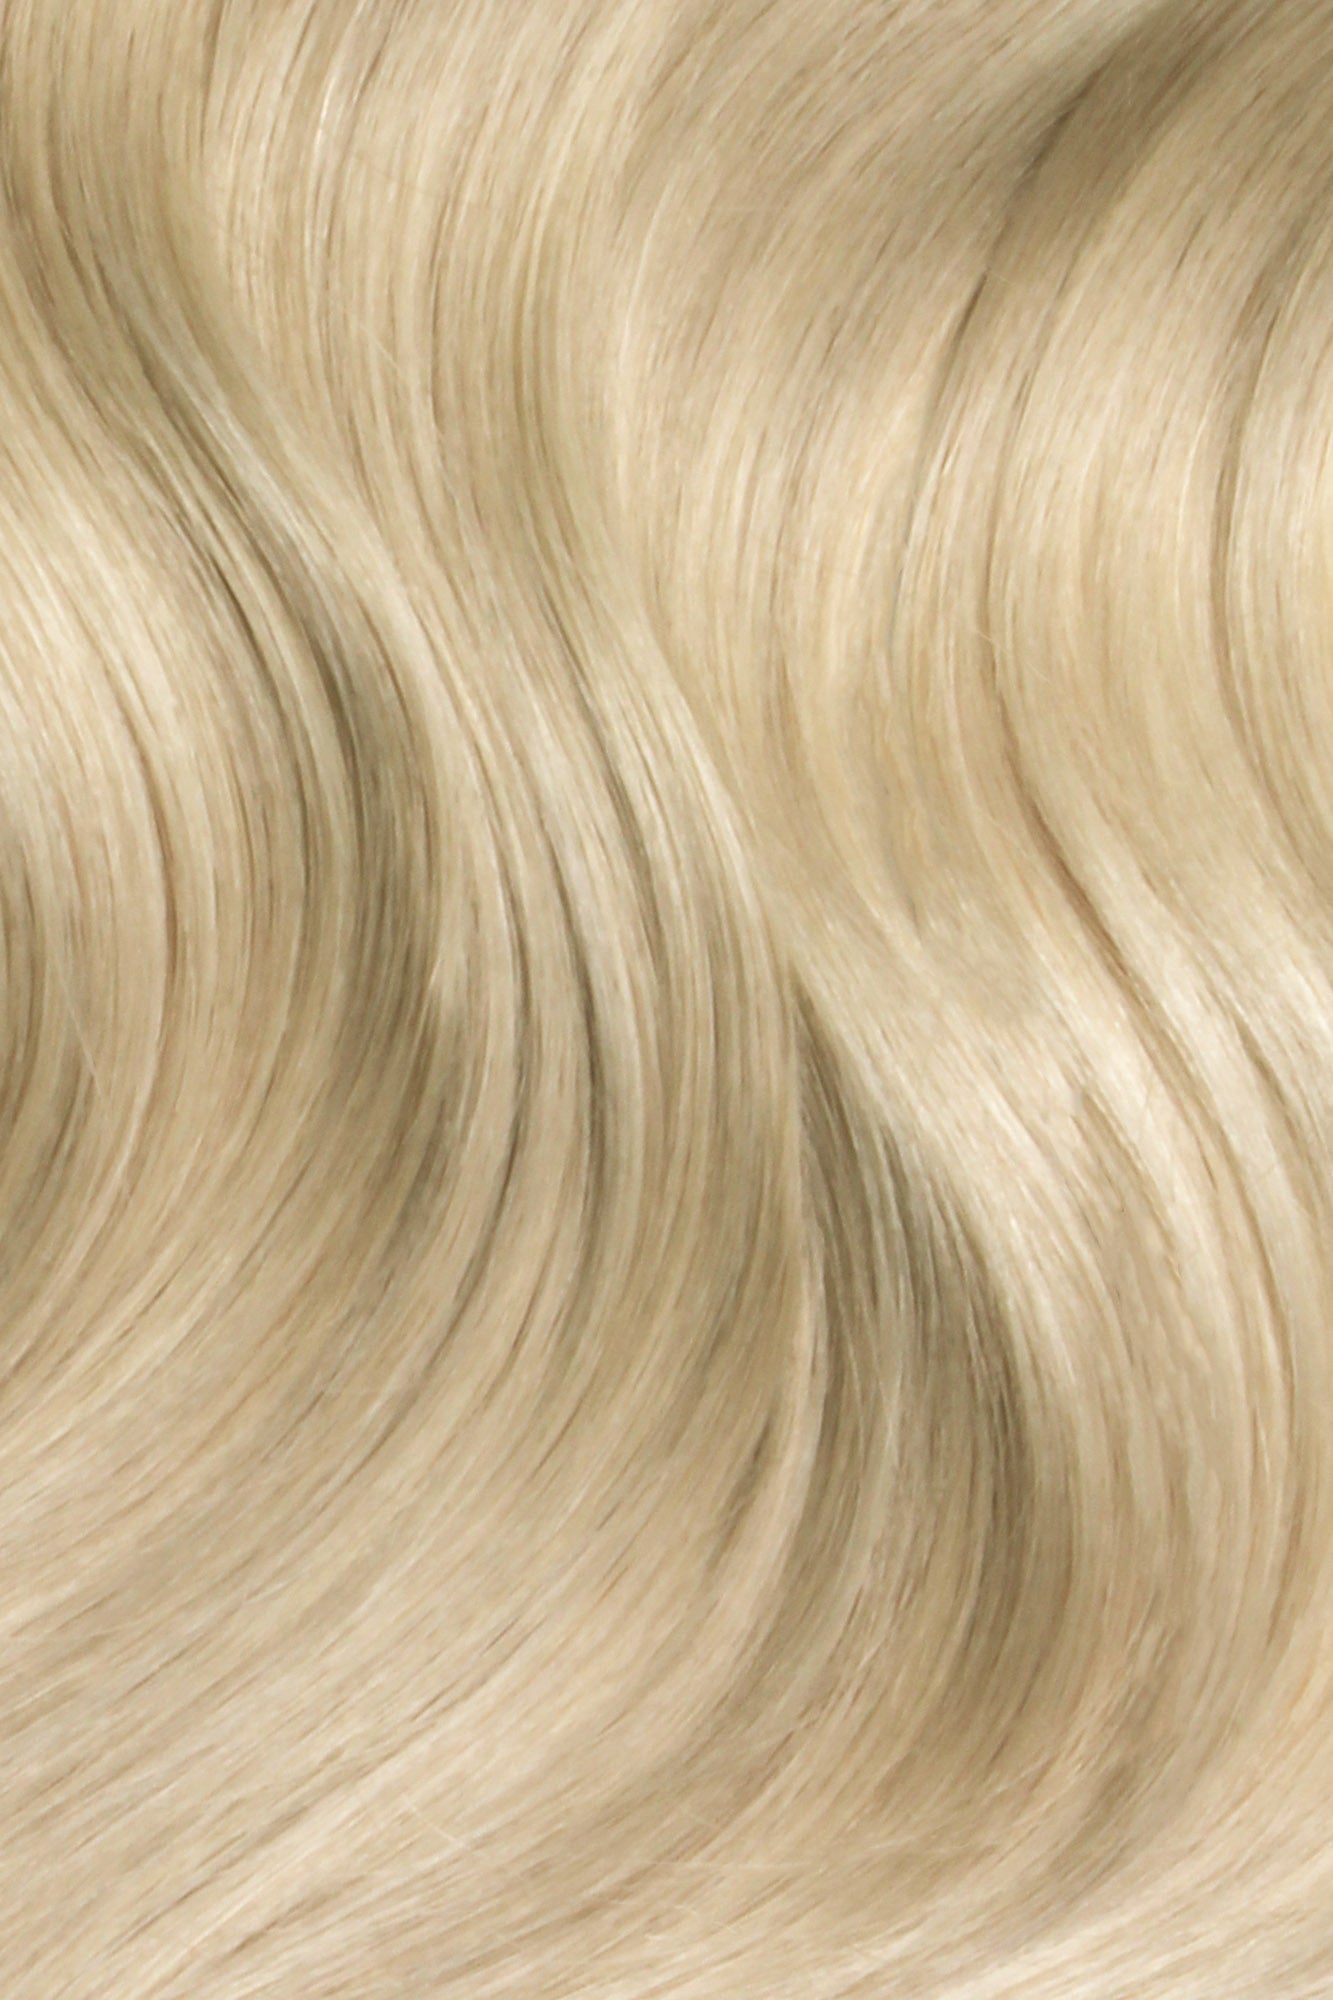 Tiny Tip Bonds 22&quot; - SWAY Hair Extensions Hollywood-Ash-Blonde: Lightweight, discreet. Made with Italian Keratin for comfort and long-lasting wear. Reusable and compatible with other SWAY Salon Professional Methods